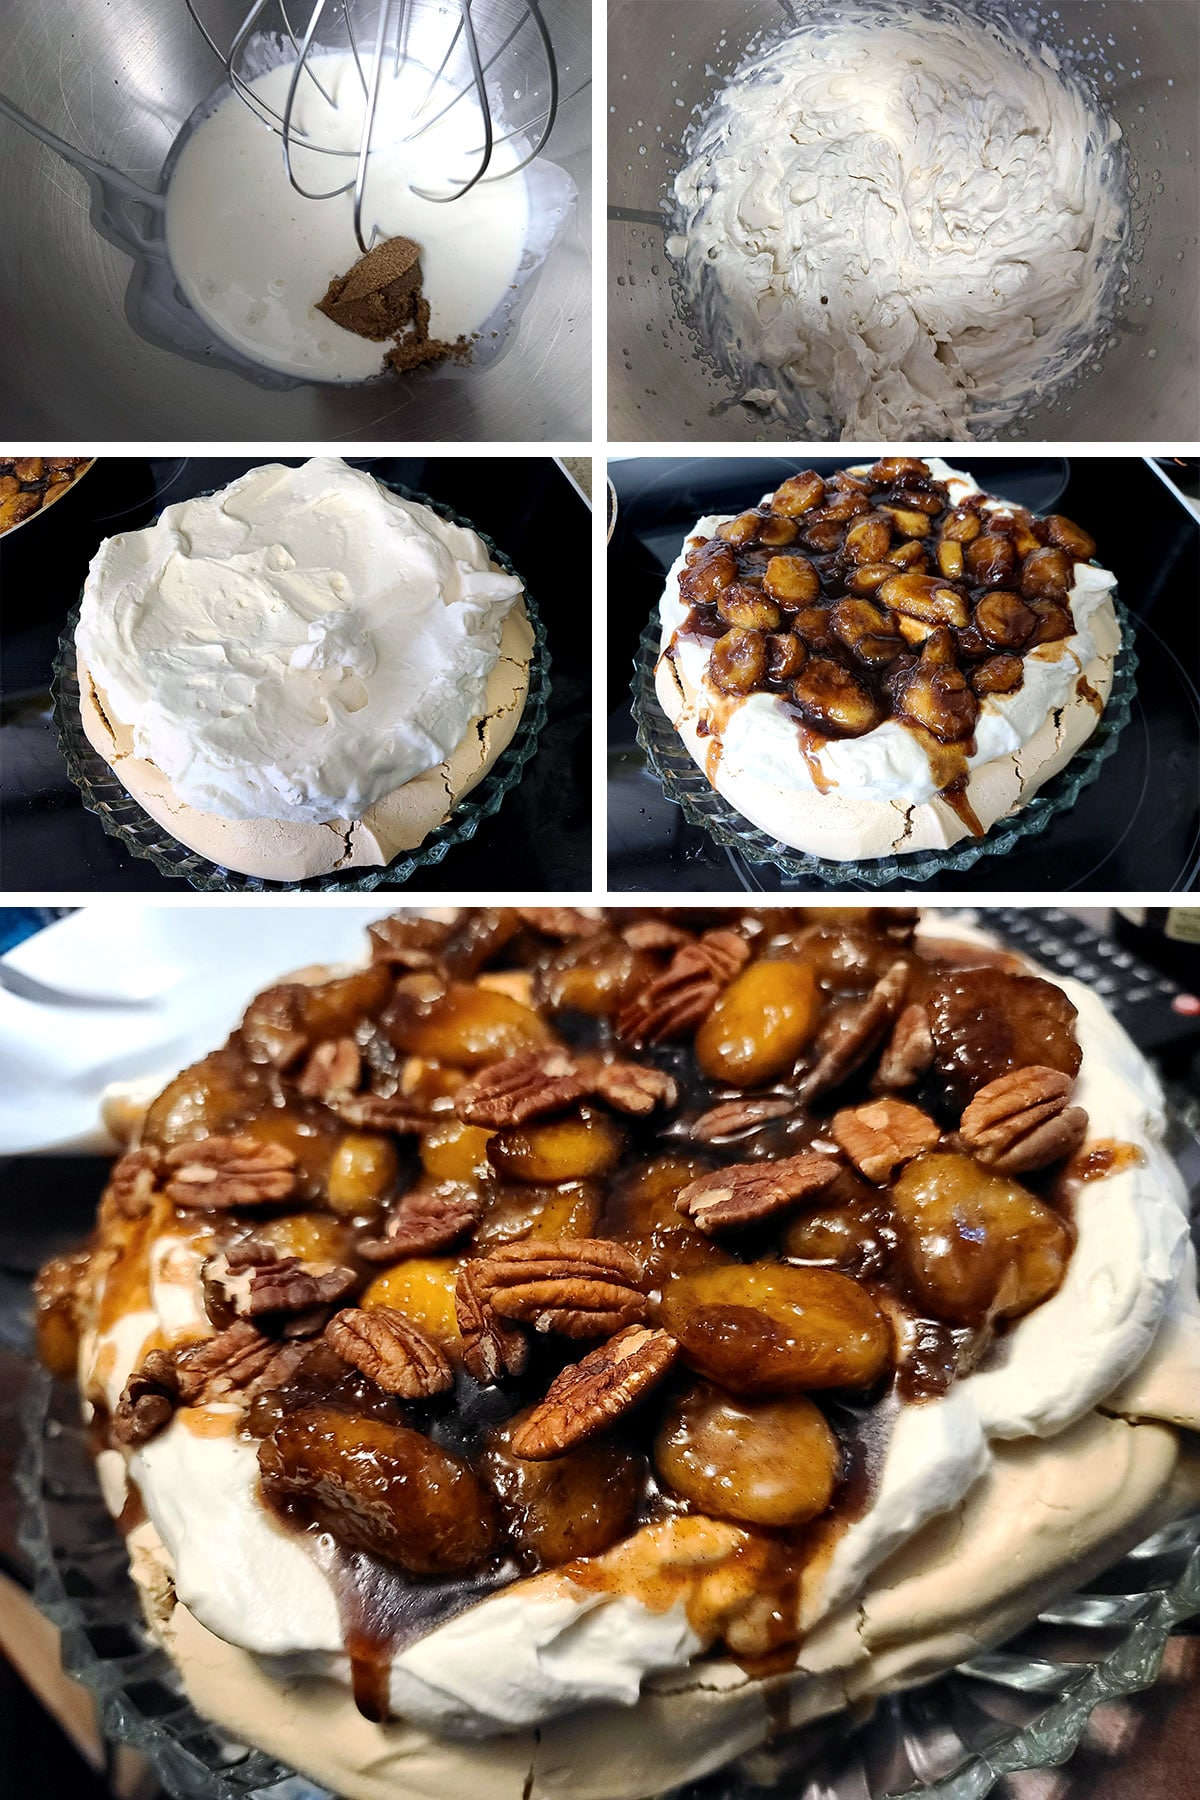 A 5 part compilation image, showing the whipping cream being made, and the pavlova assembled with the toppings.